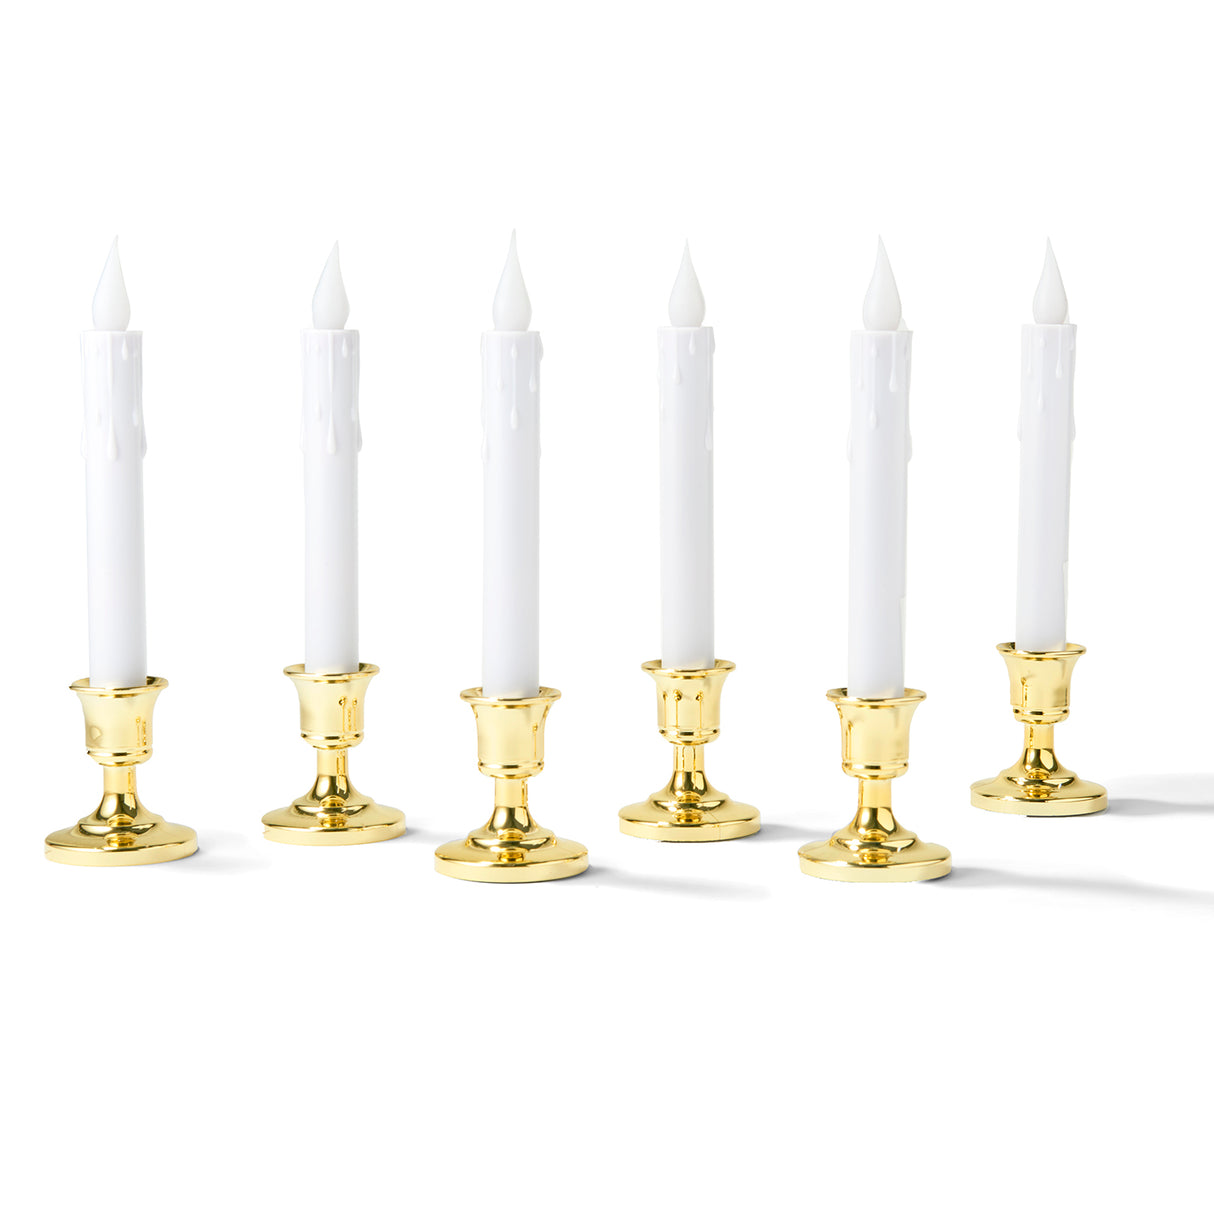 Ivy White Flameless Resin Window Candles with Removable Gold Bases, Set of 6